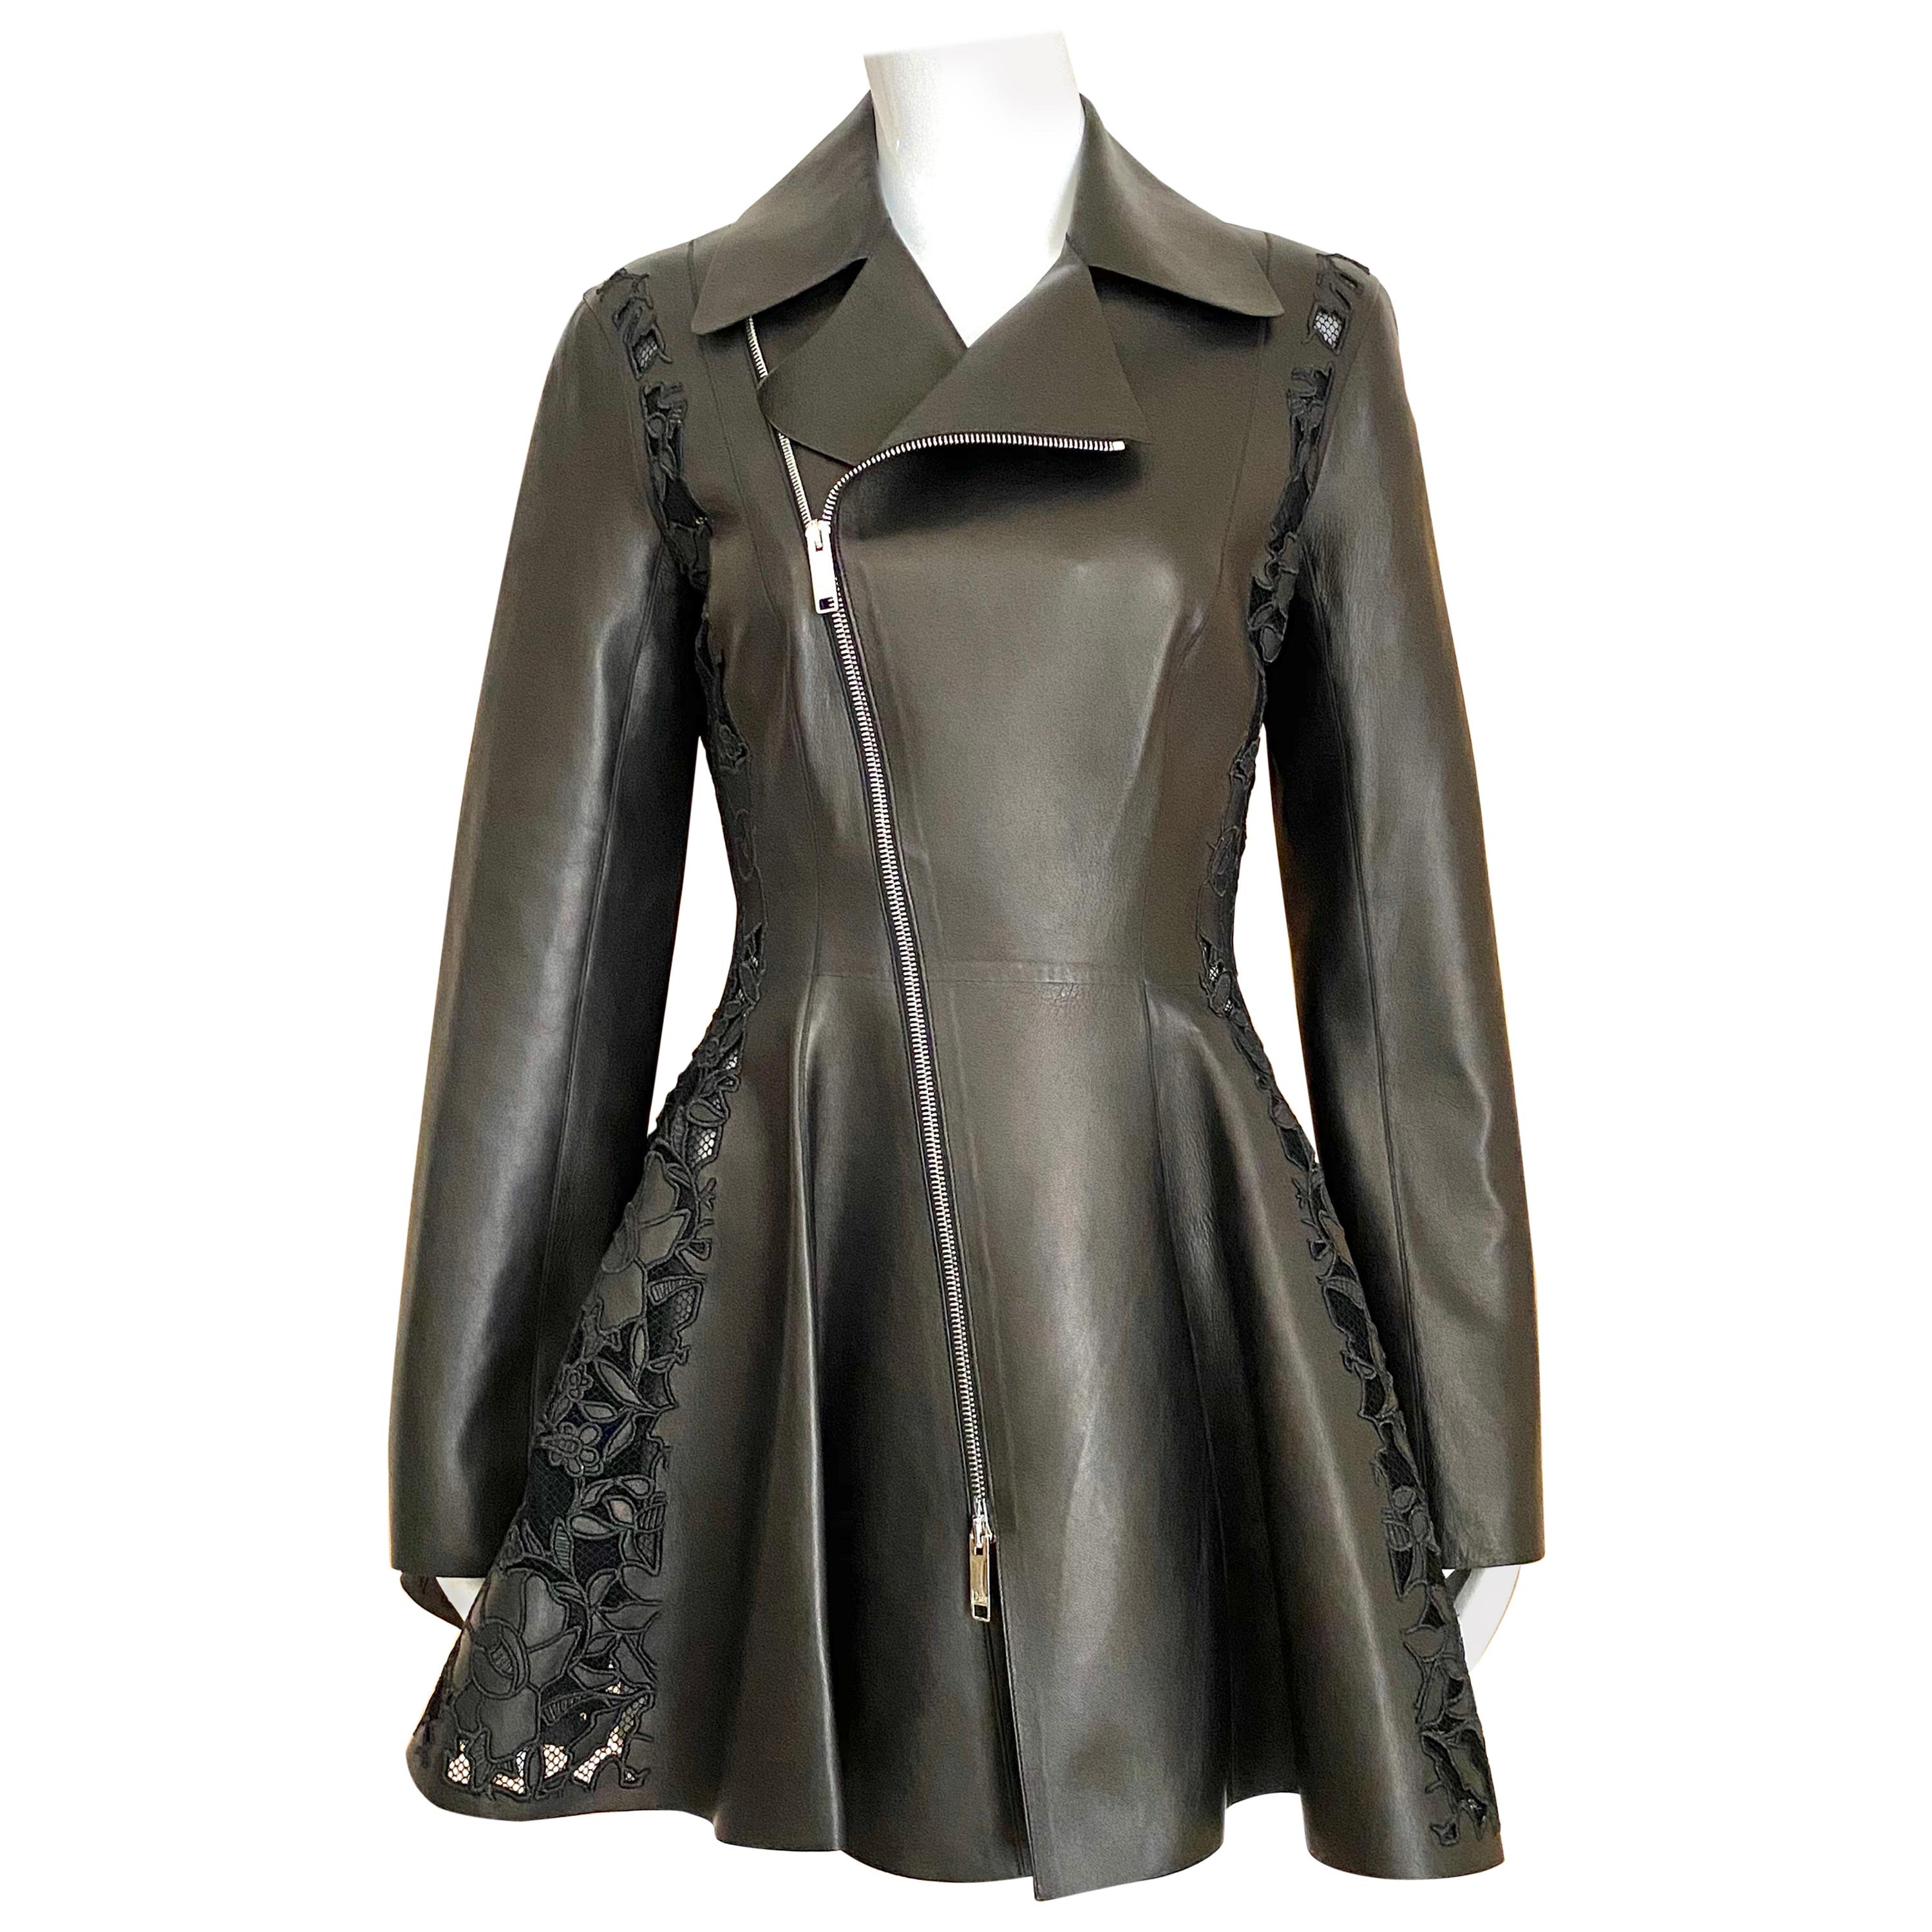 Christian Dior Black Leather Peplum Jacket with Lace 